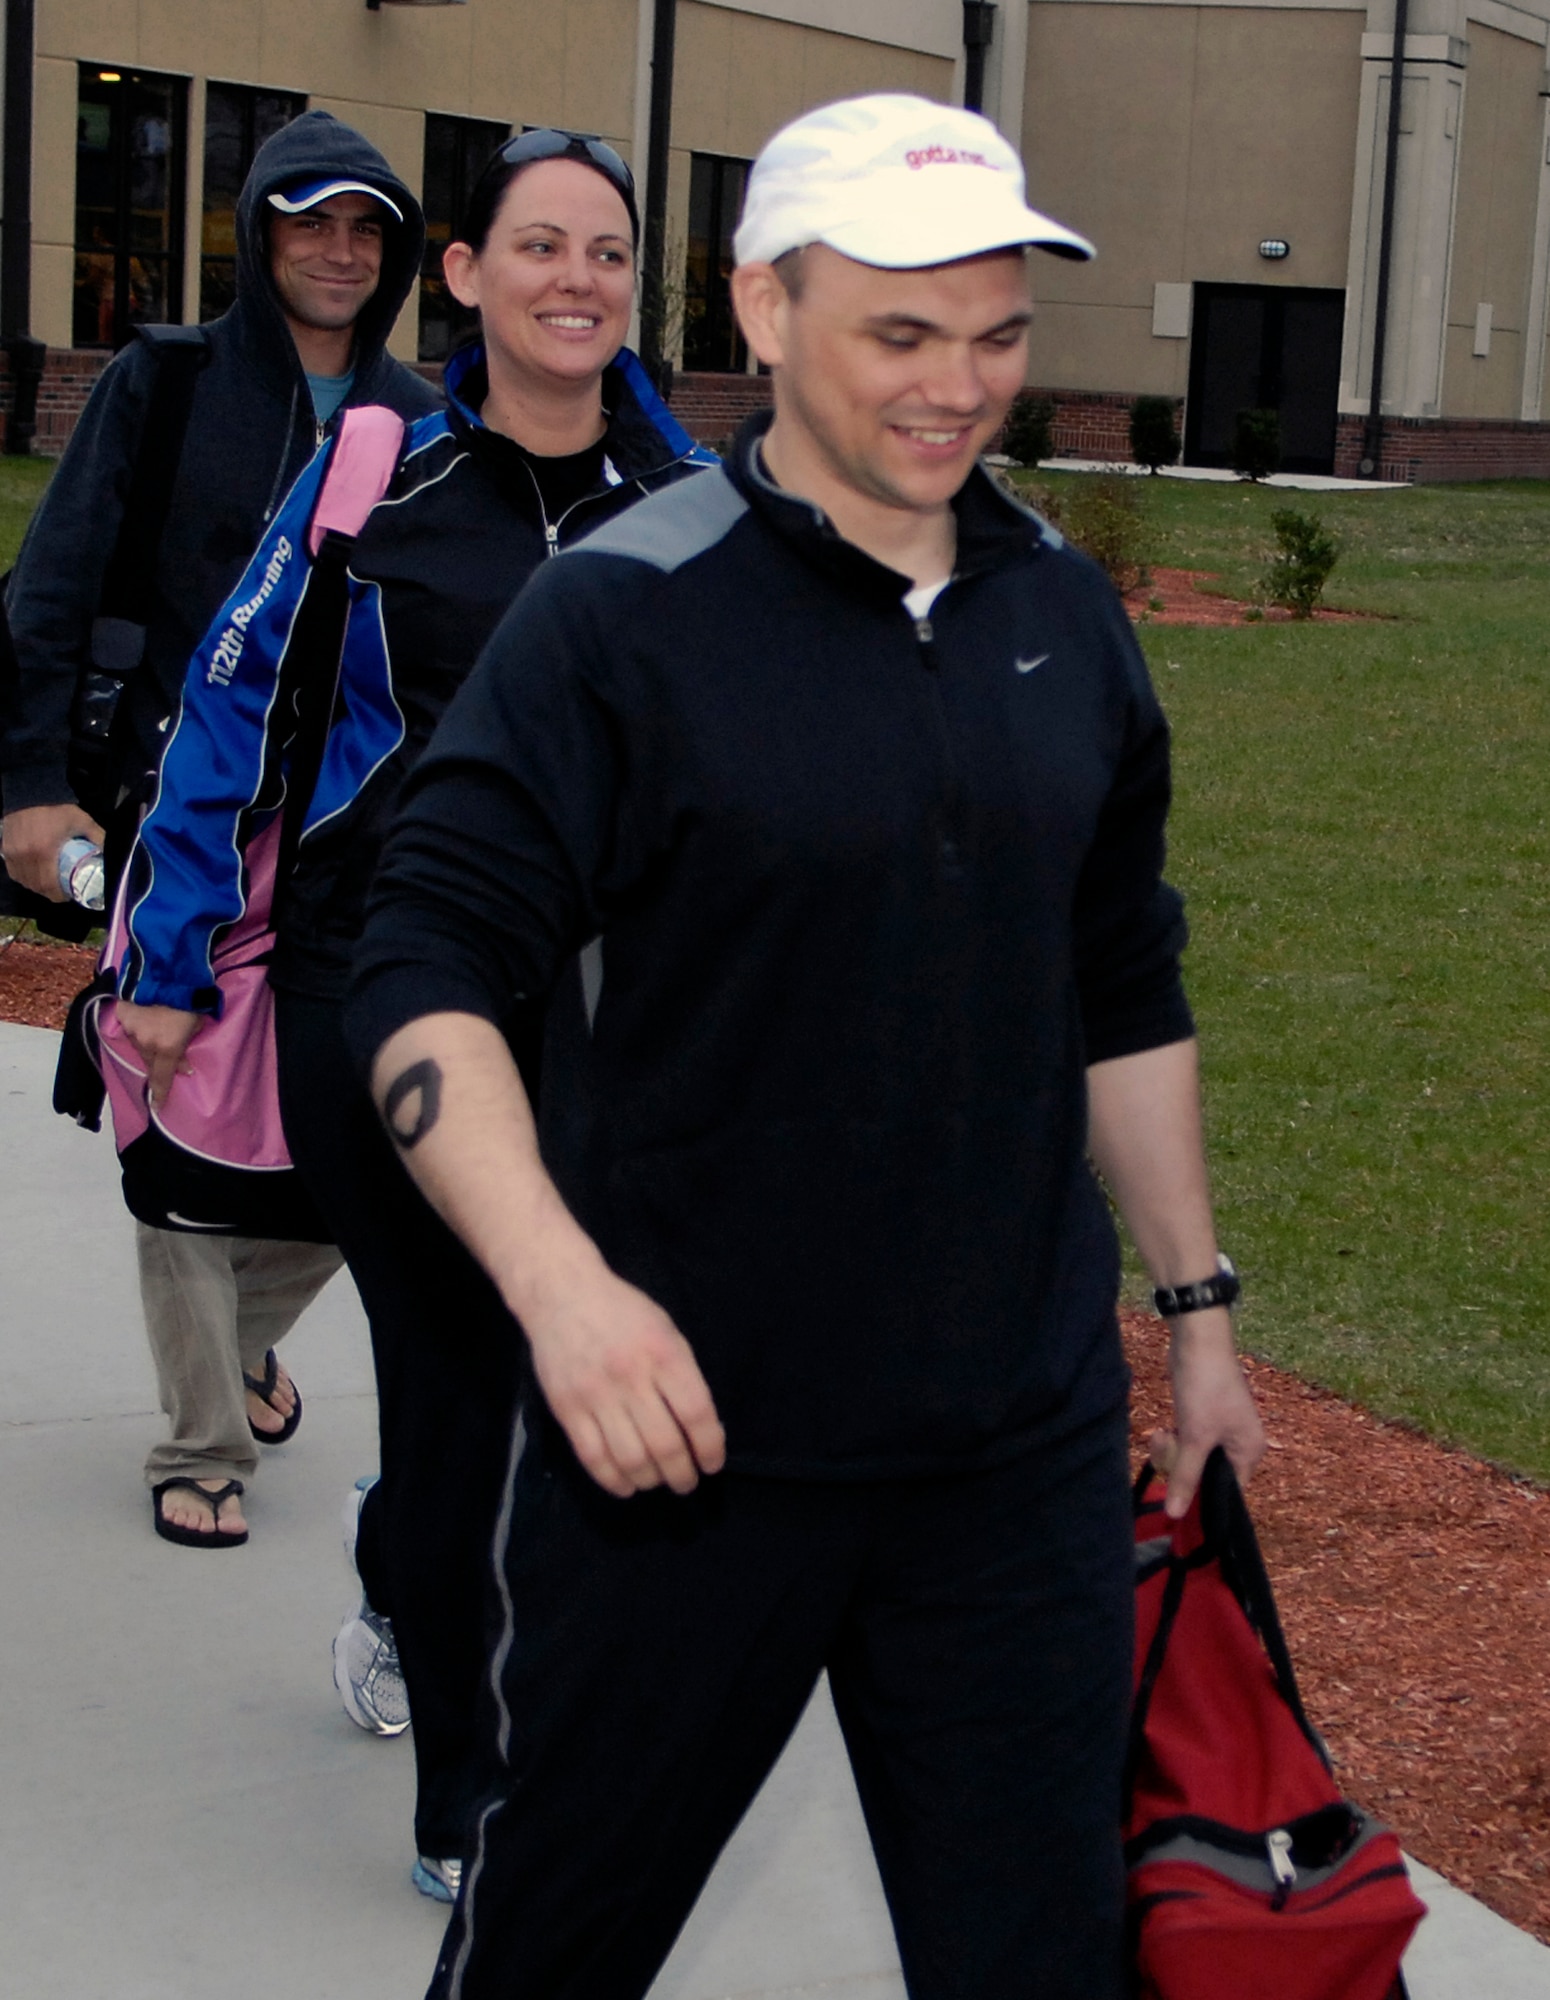 HANSCOM AFB, Mass. – Capt. Brad Panton (front), Program Manager for the Enhanced Regional Situation Awareness Program here, and siblings Army Capt. Jeannie Deakyne (center) and Navy Lt. Davie Panton, board a bus from the Fitness and Sports Center for the Boston Marathon April 21. Due to deployments and being geographically separated, the three of them decided to run the marathon together, after not seeing each other for close to a year. (U.S. Air Force photo by Mark Wyatt.)